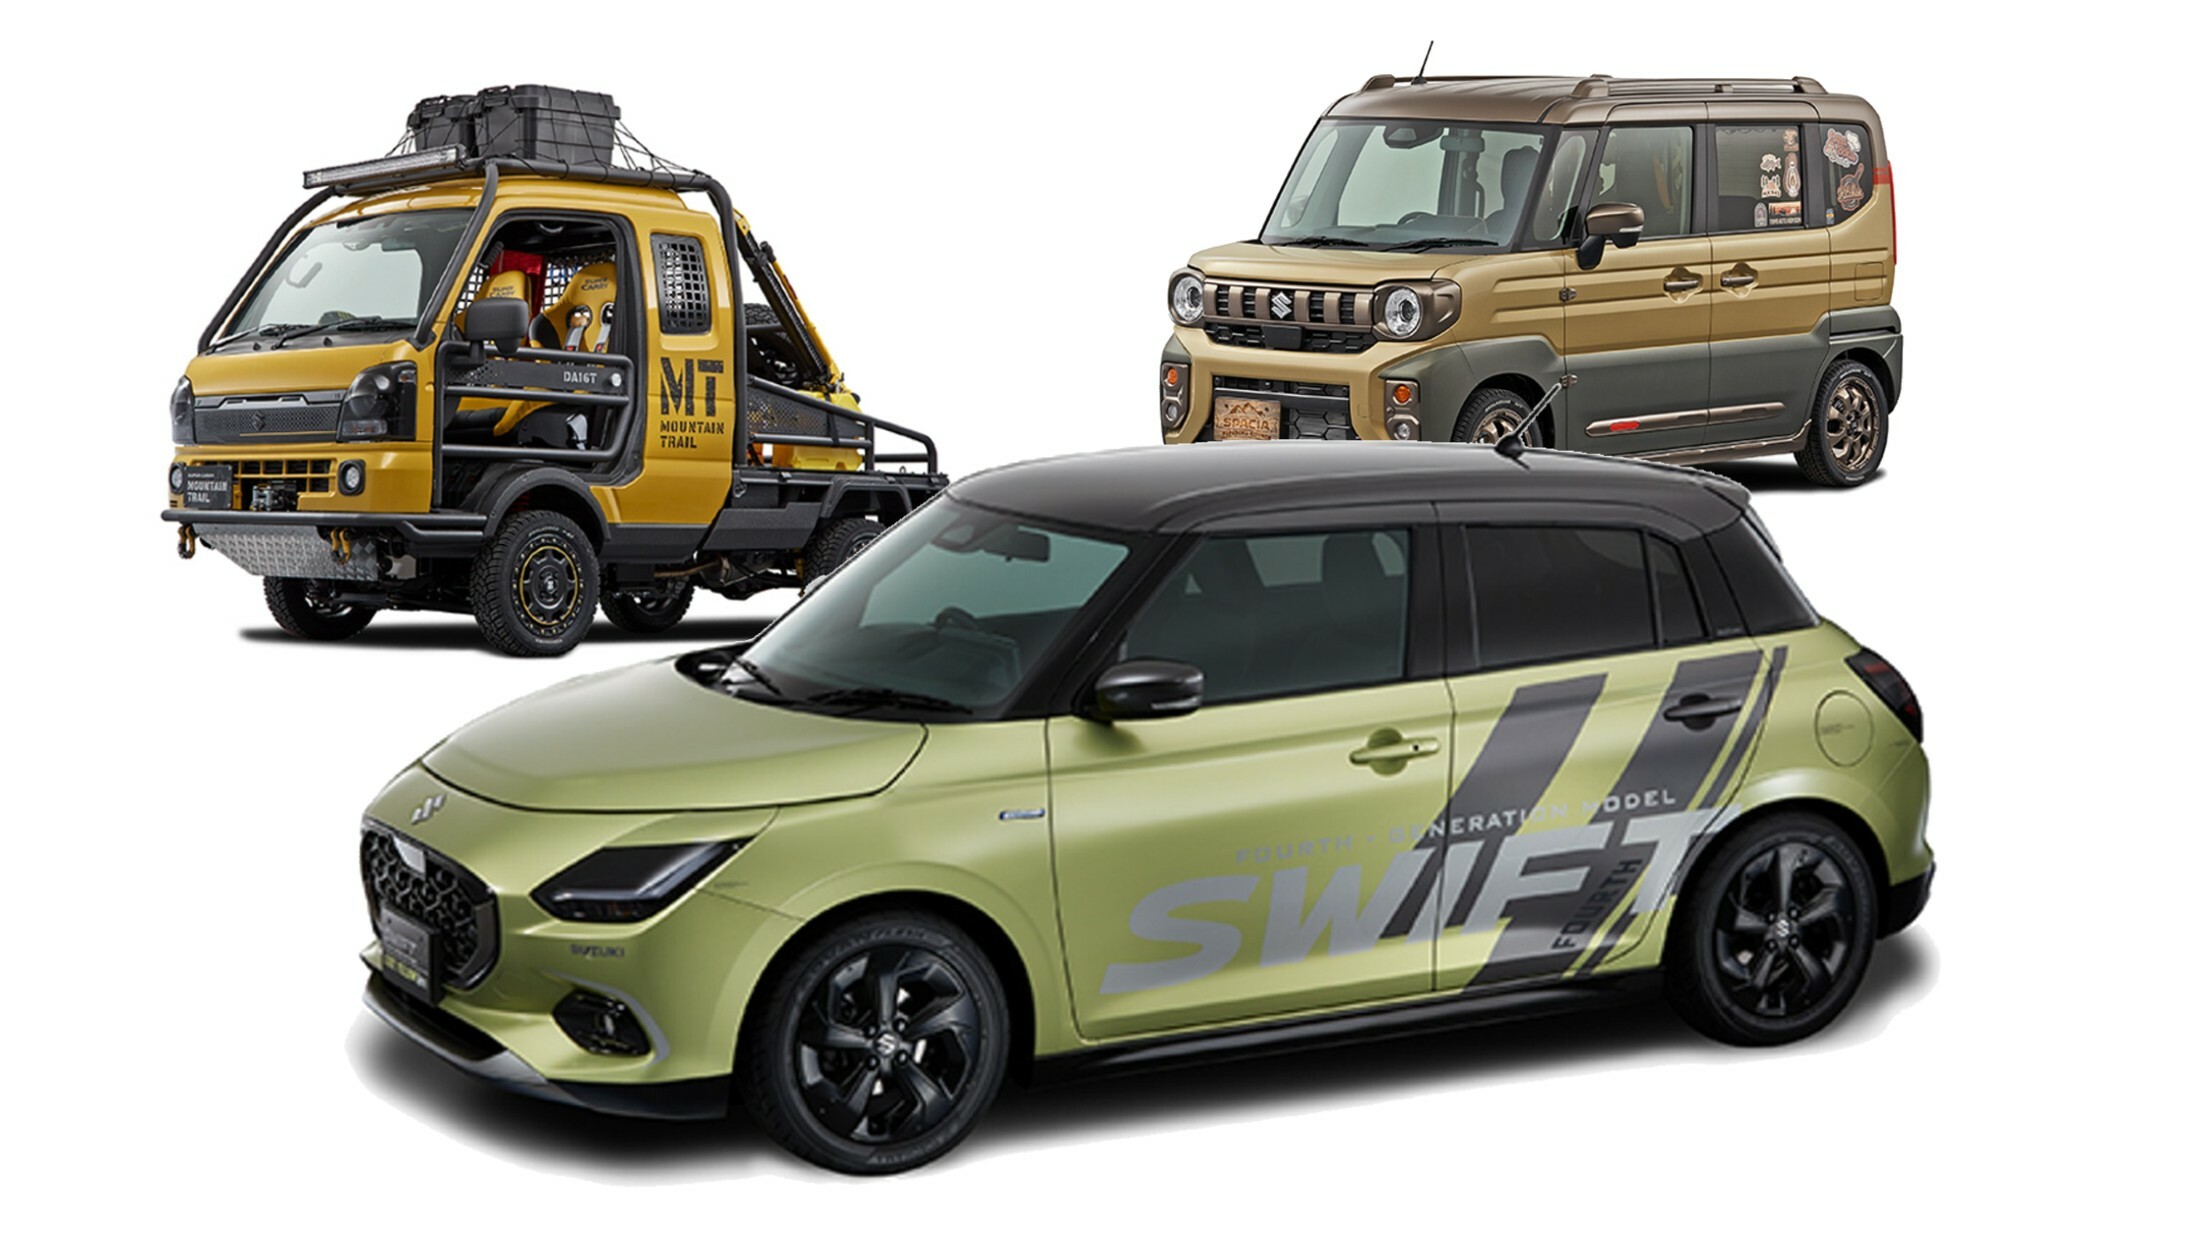 2024 Suzuki Swift previewed with concept heading to Japan Mobility